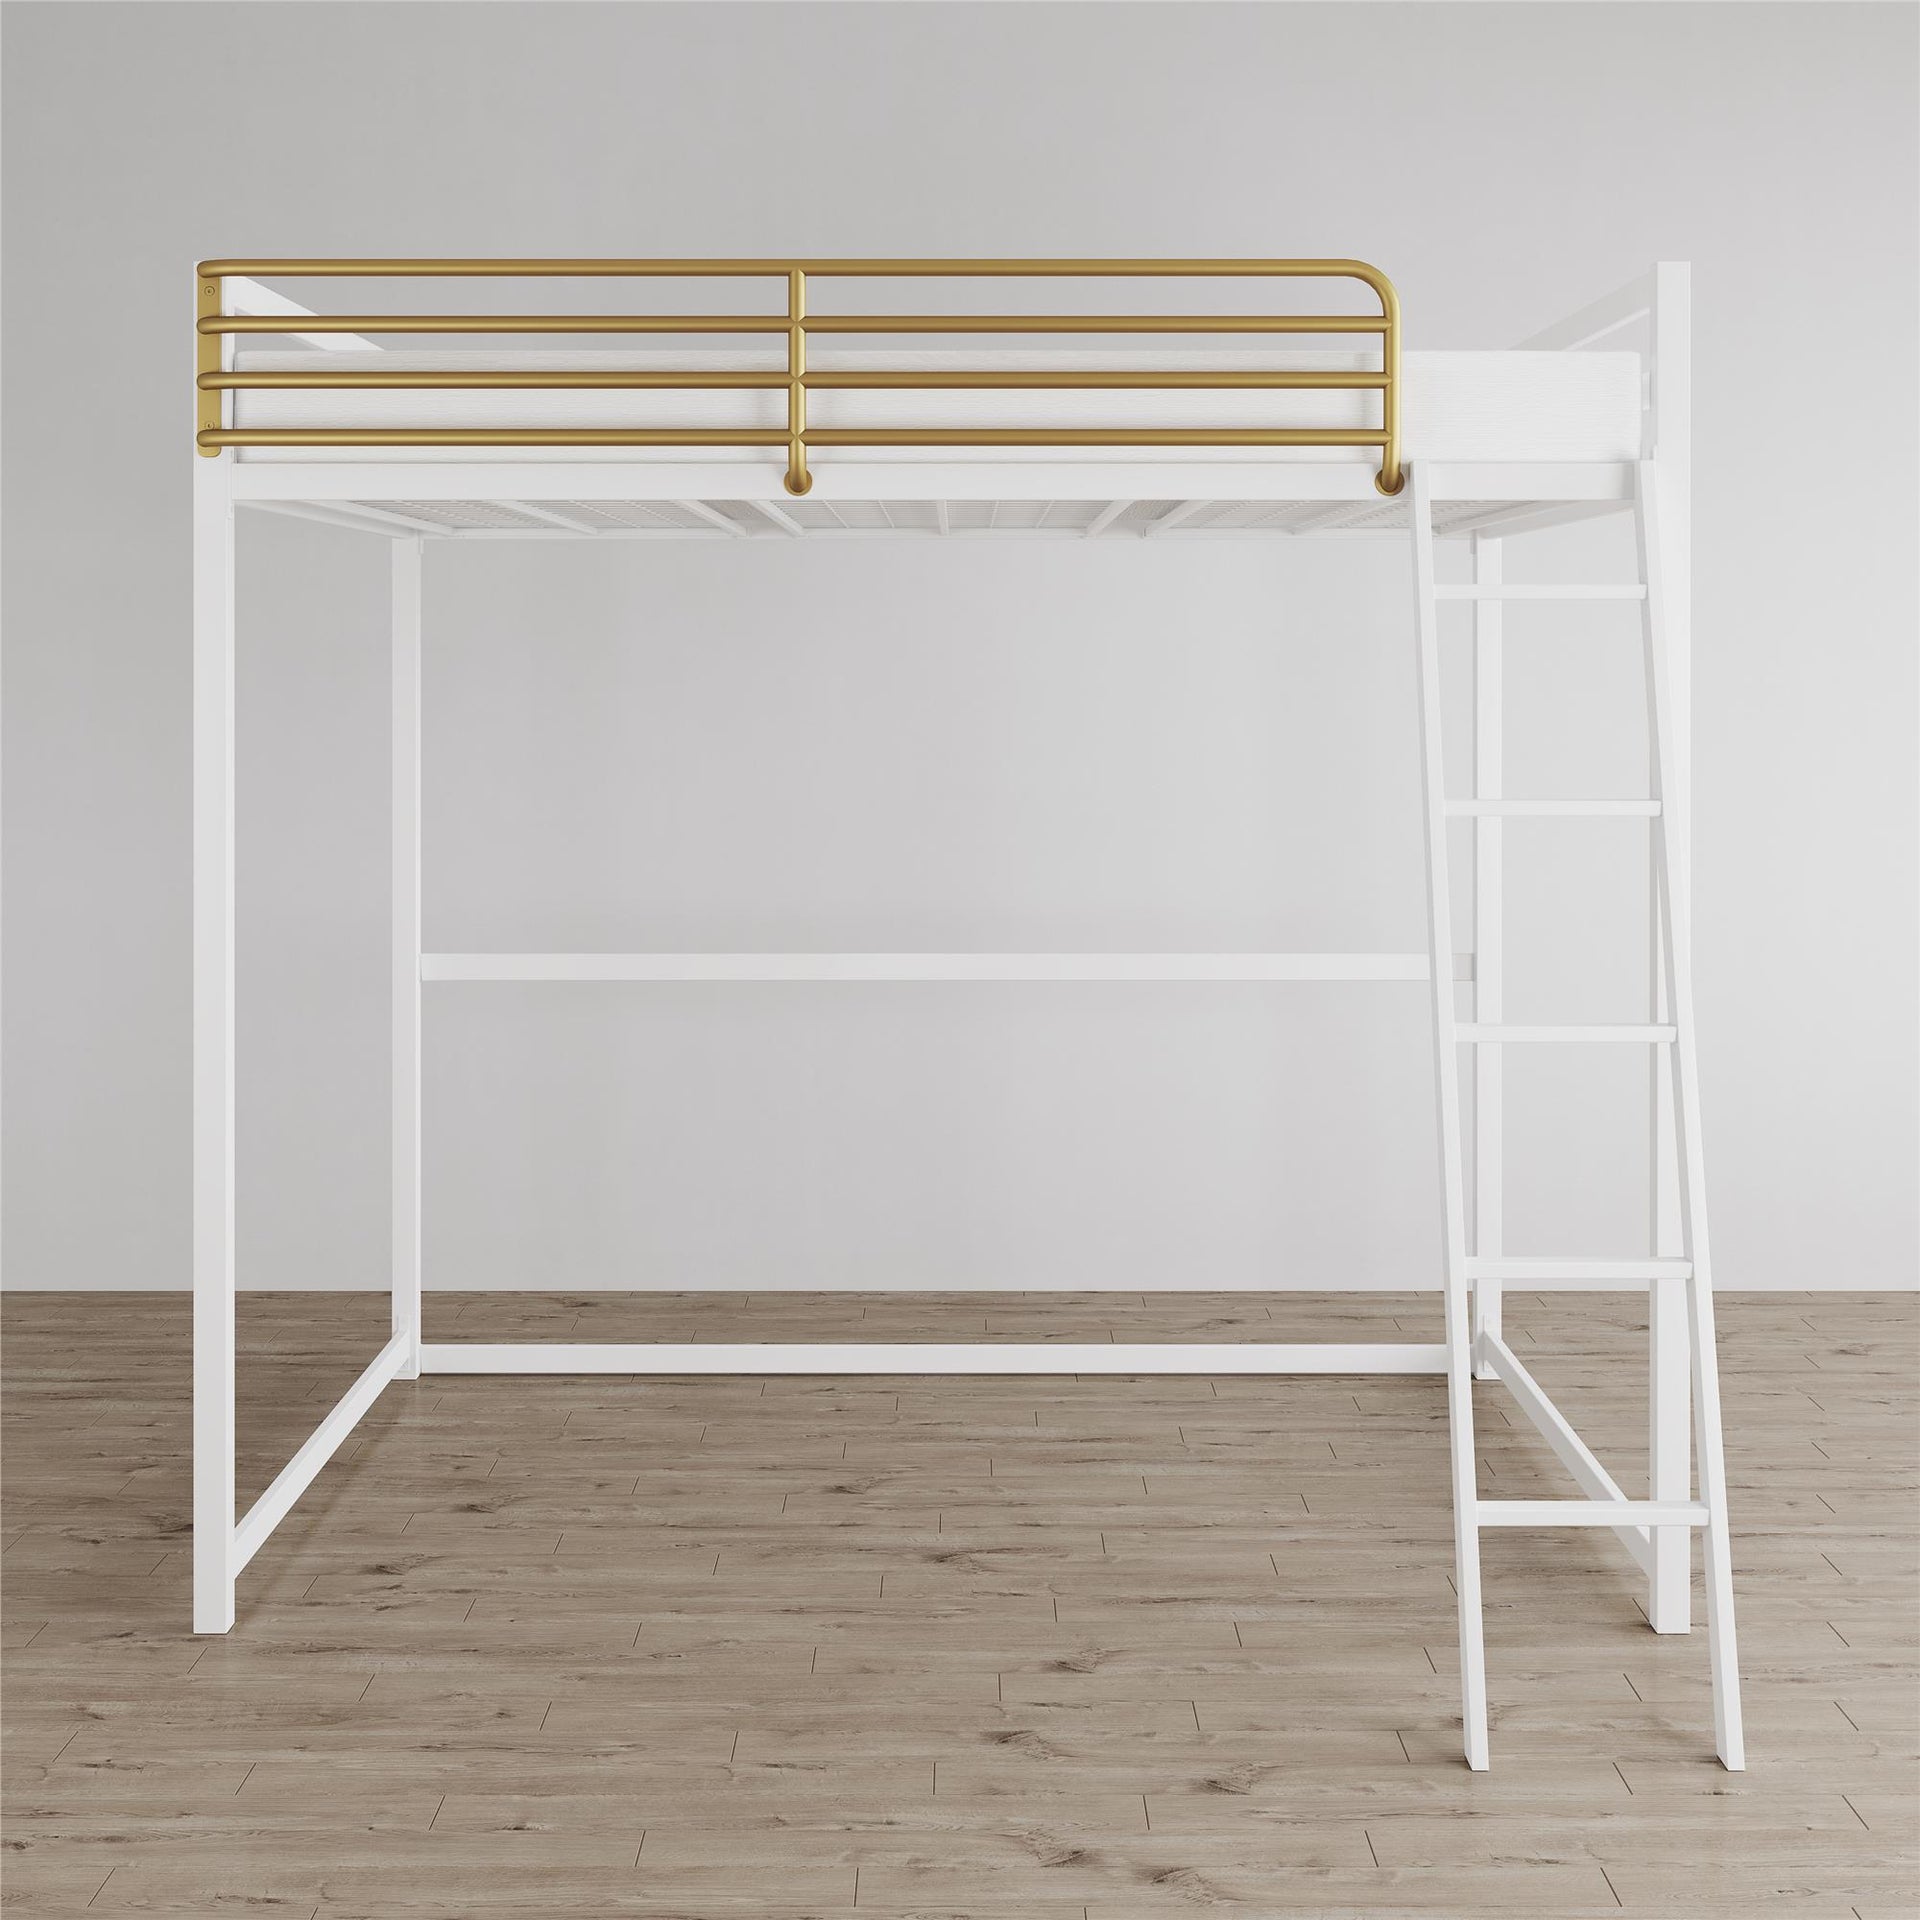 Little Seeds Monarch Hill Haven Metal Loft Bed - White - Full